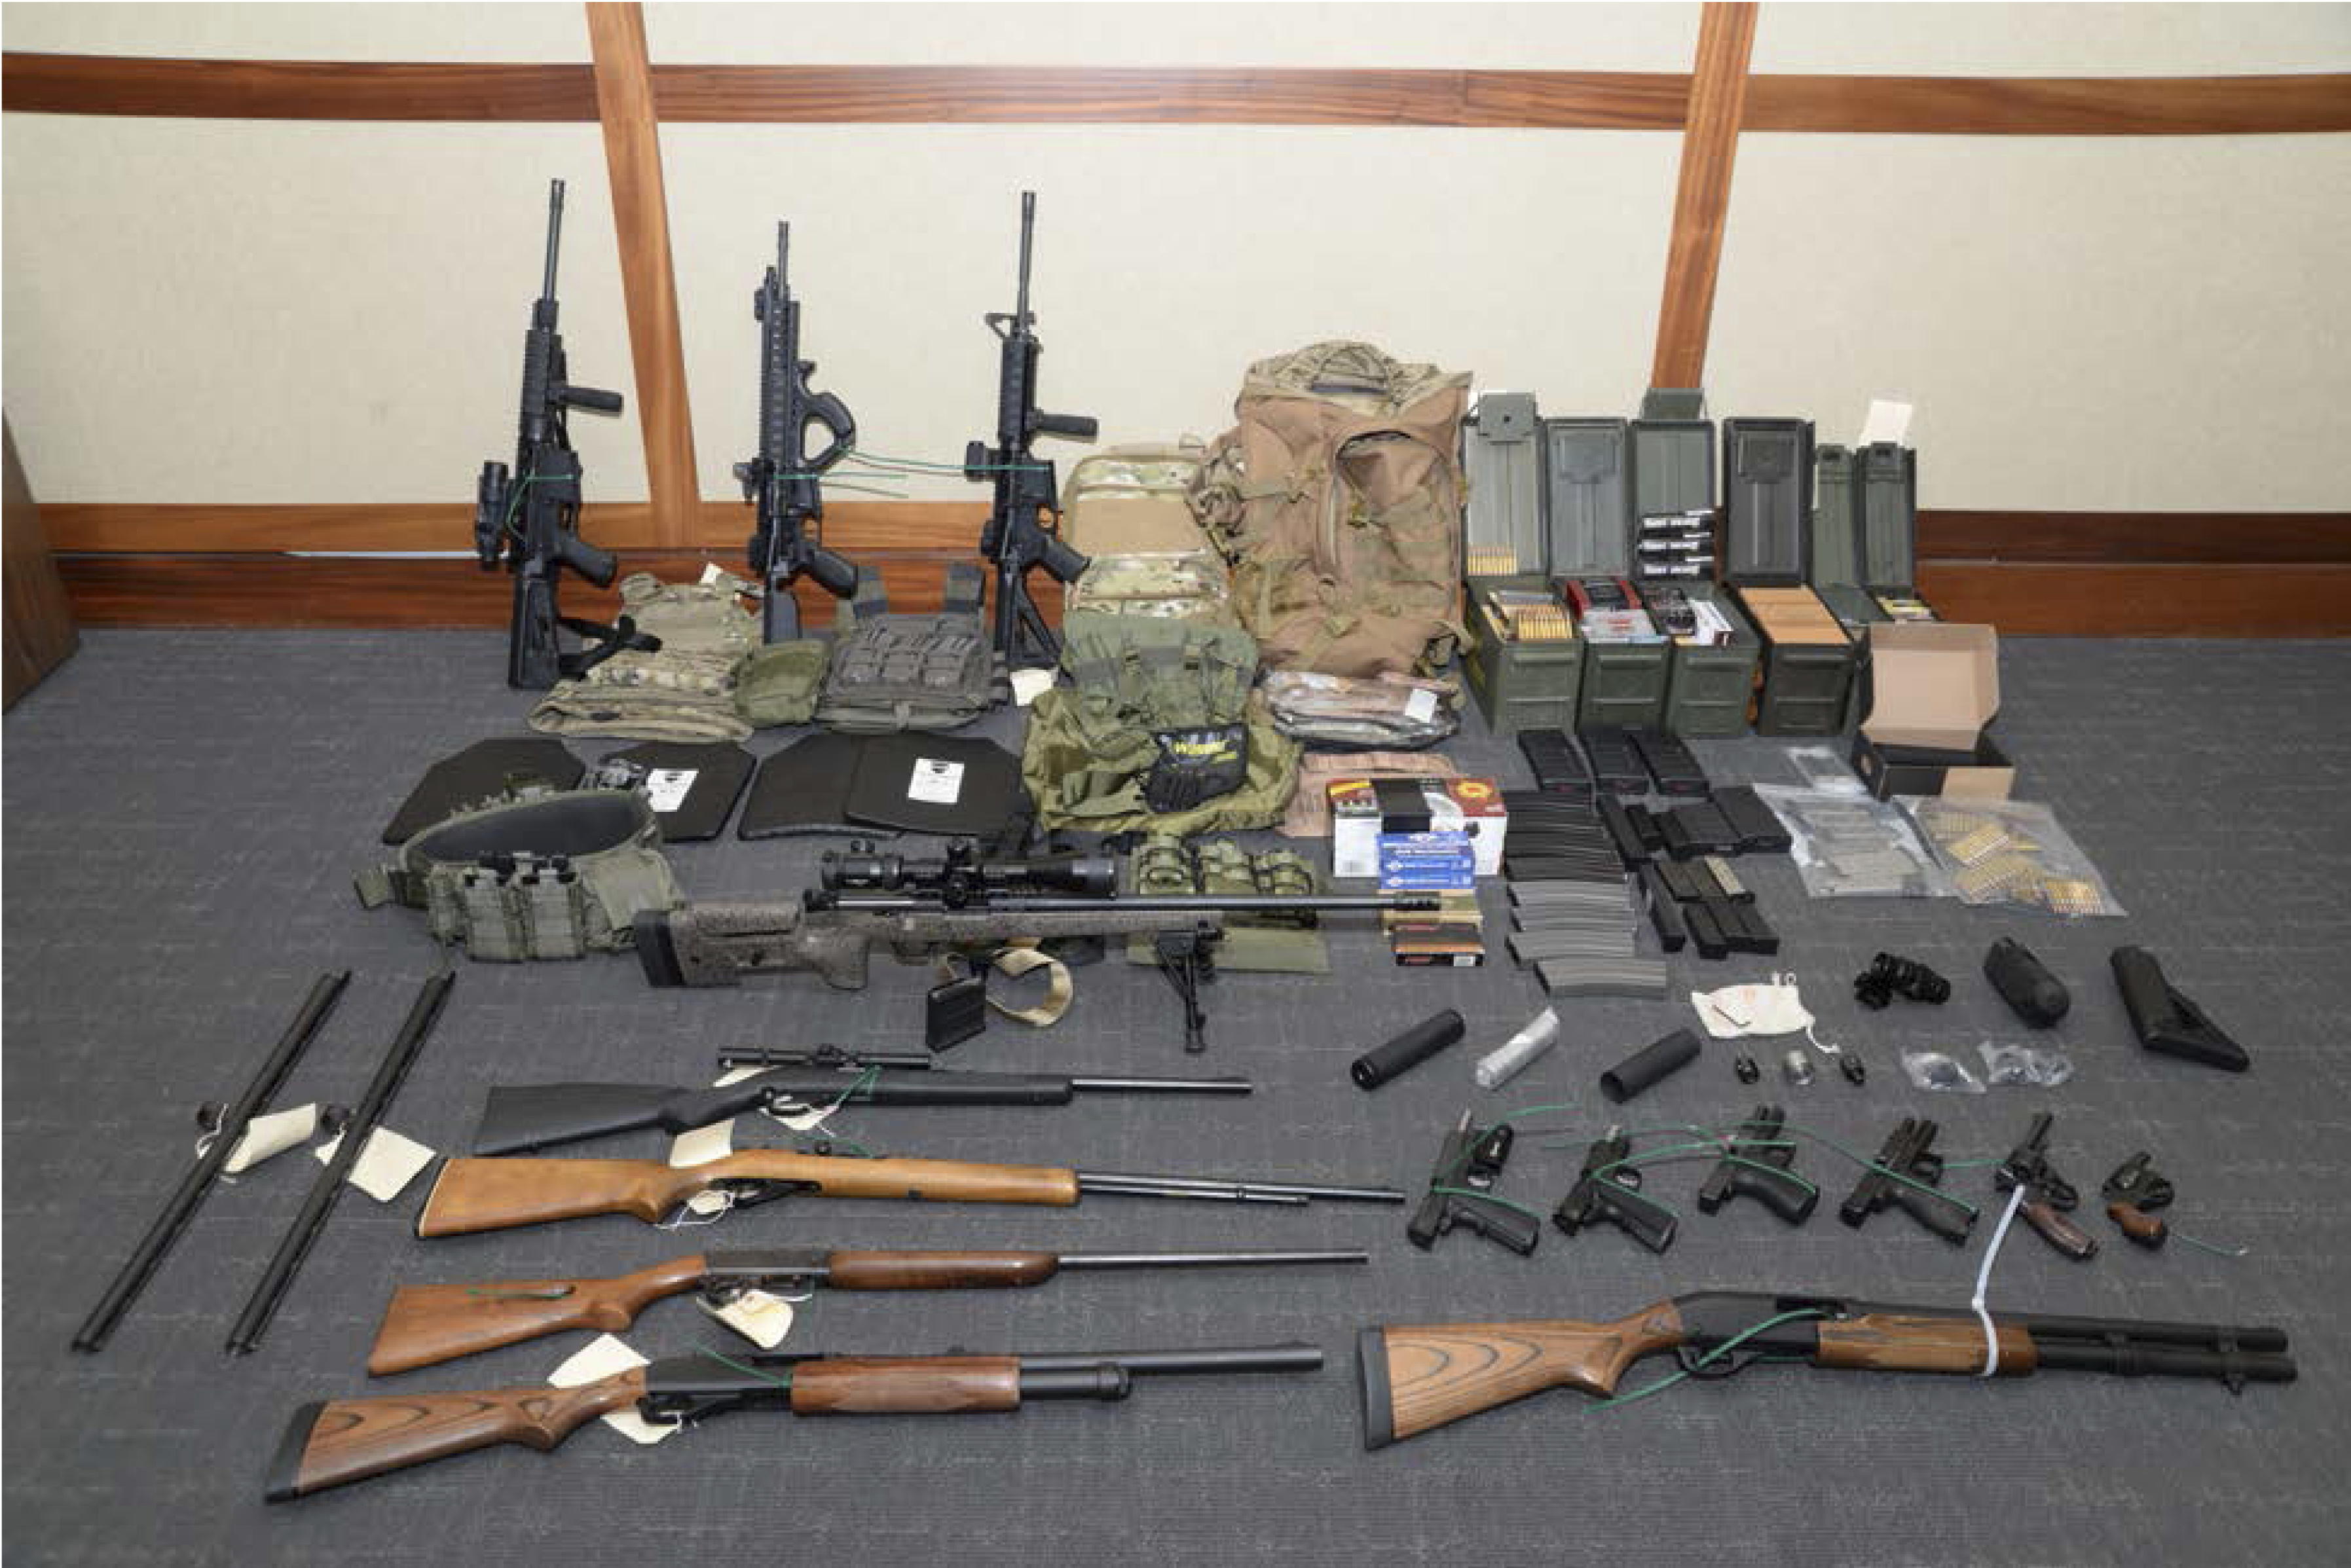 This image provided by the U.S. District Court in Maryland shows firearms and ammunition in the case against Coast Guard Lieutenant Christopher Paul Hasson. (AP)